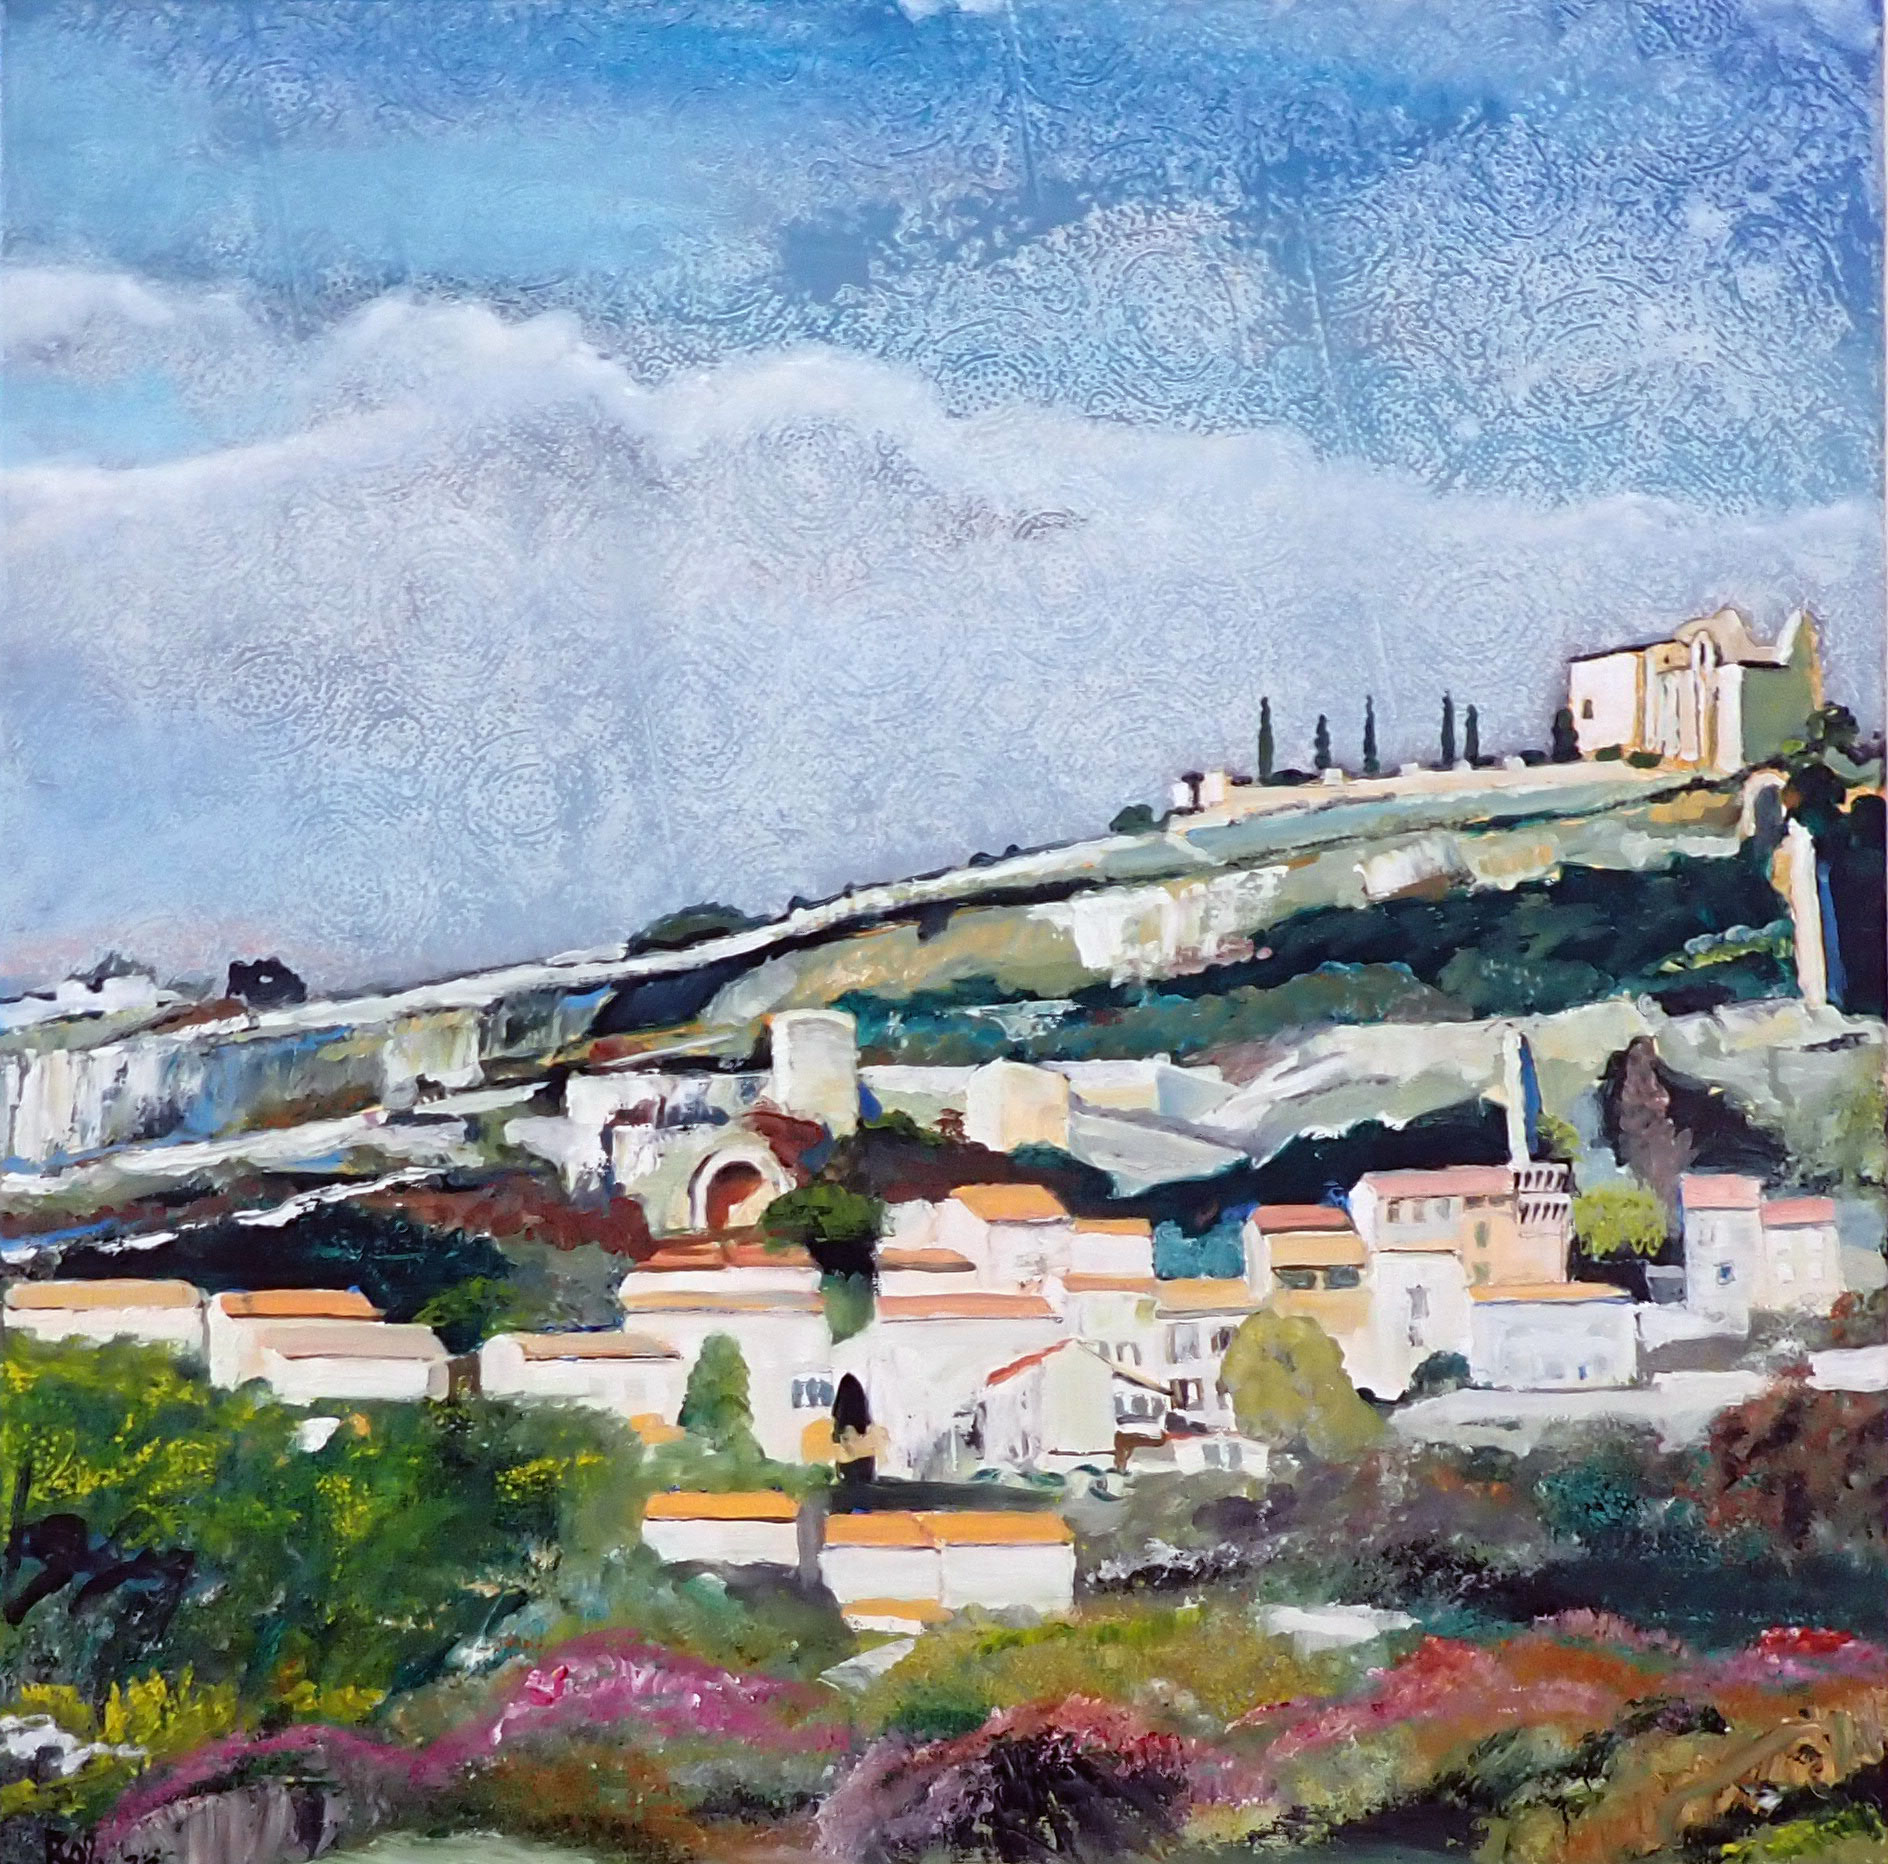 Painting St Saturnin les Apt, printemps 4 by Rob Lieveloo